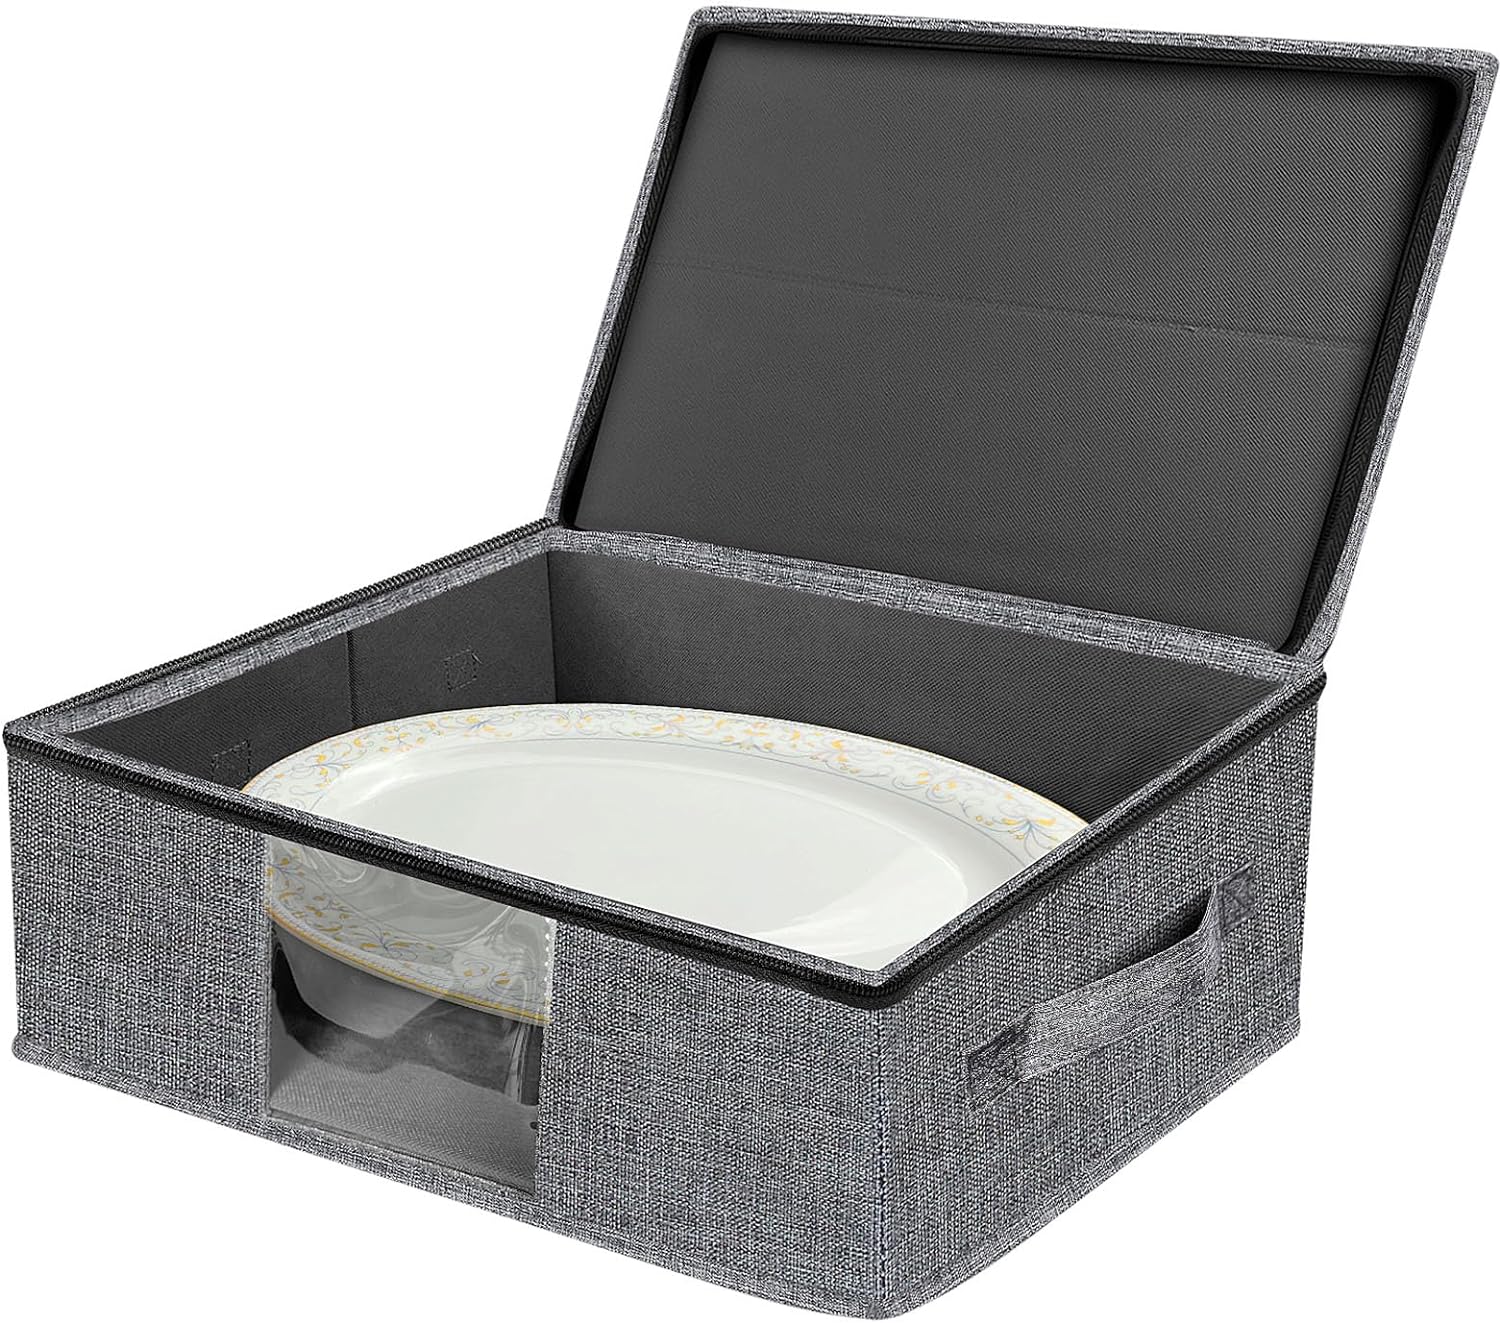 VERONLY Platter Storage Case - Plate Storage Containers, Stackable China Storage Containers Hard Shell,4 Felt Dividers Included for Dish,Plate, Dinnerware and Transport(Gray)